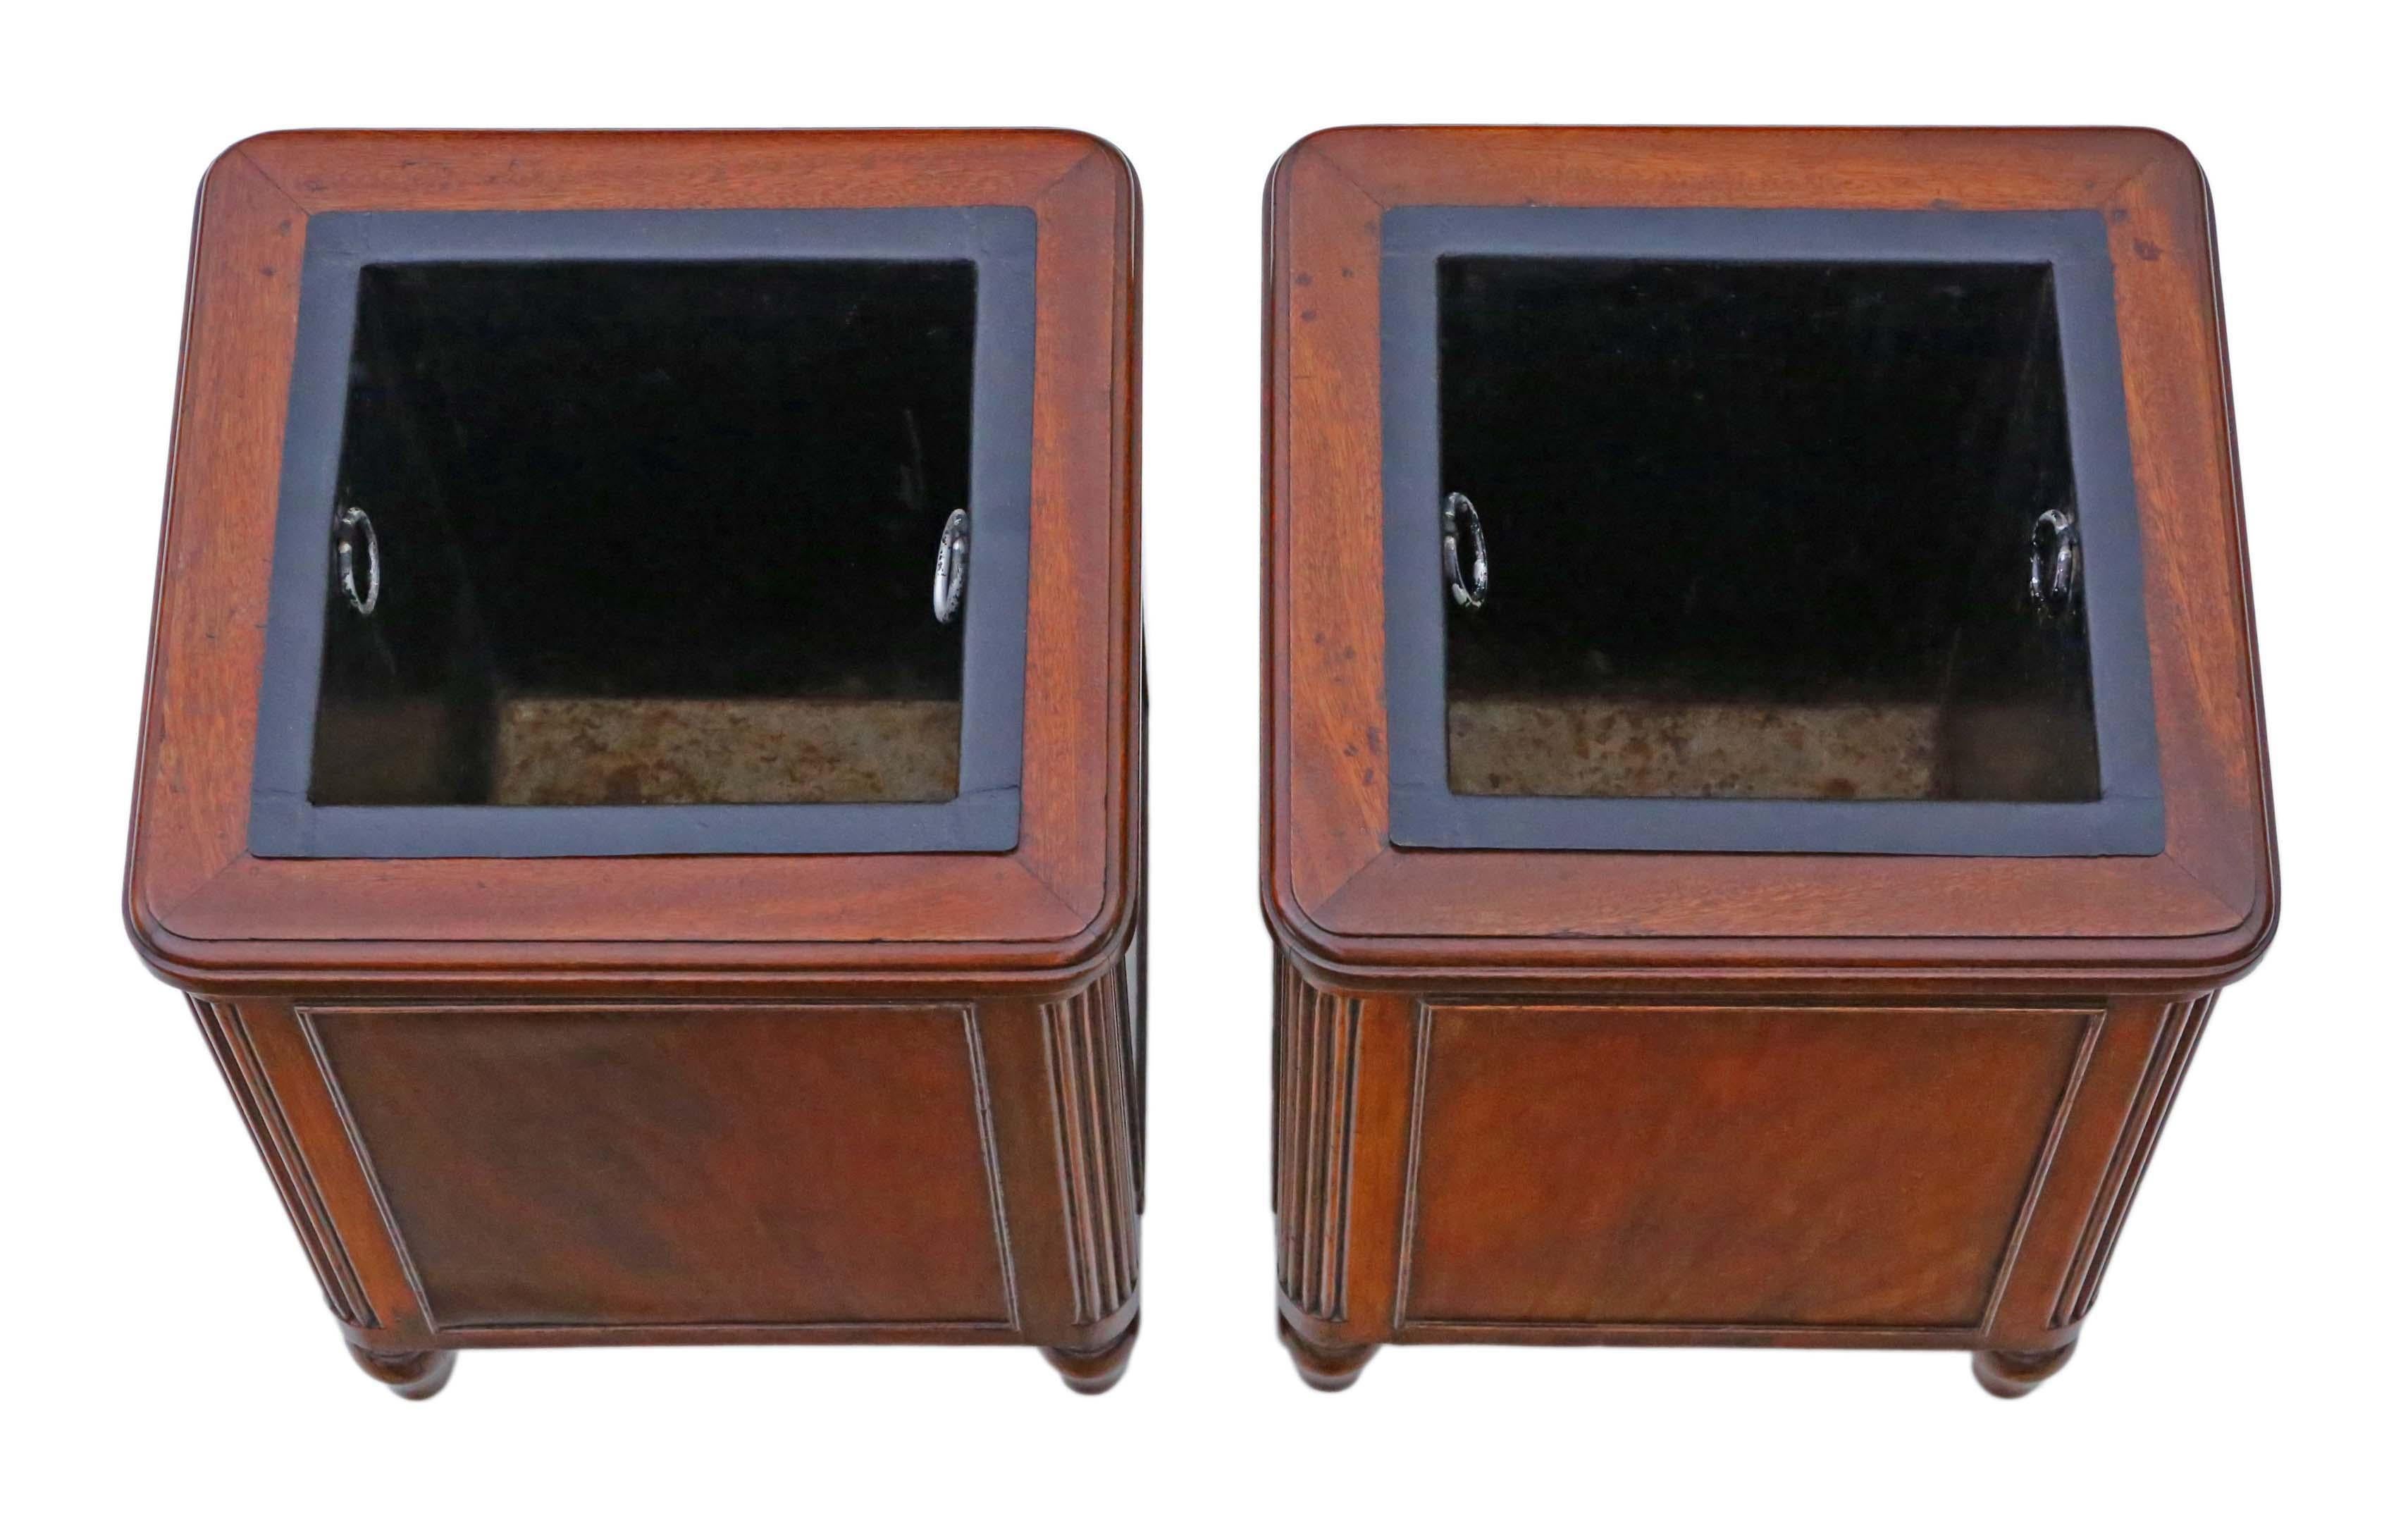 Antique fine quality pair of mahogany jardiniere planters or waste paper bins, early 20th century. Made by FH Jolly.

These are fine quality, solid and heavy, with no loose joints. Very stable.

No woodworm.

Good age and patina, would look